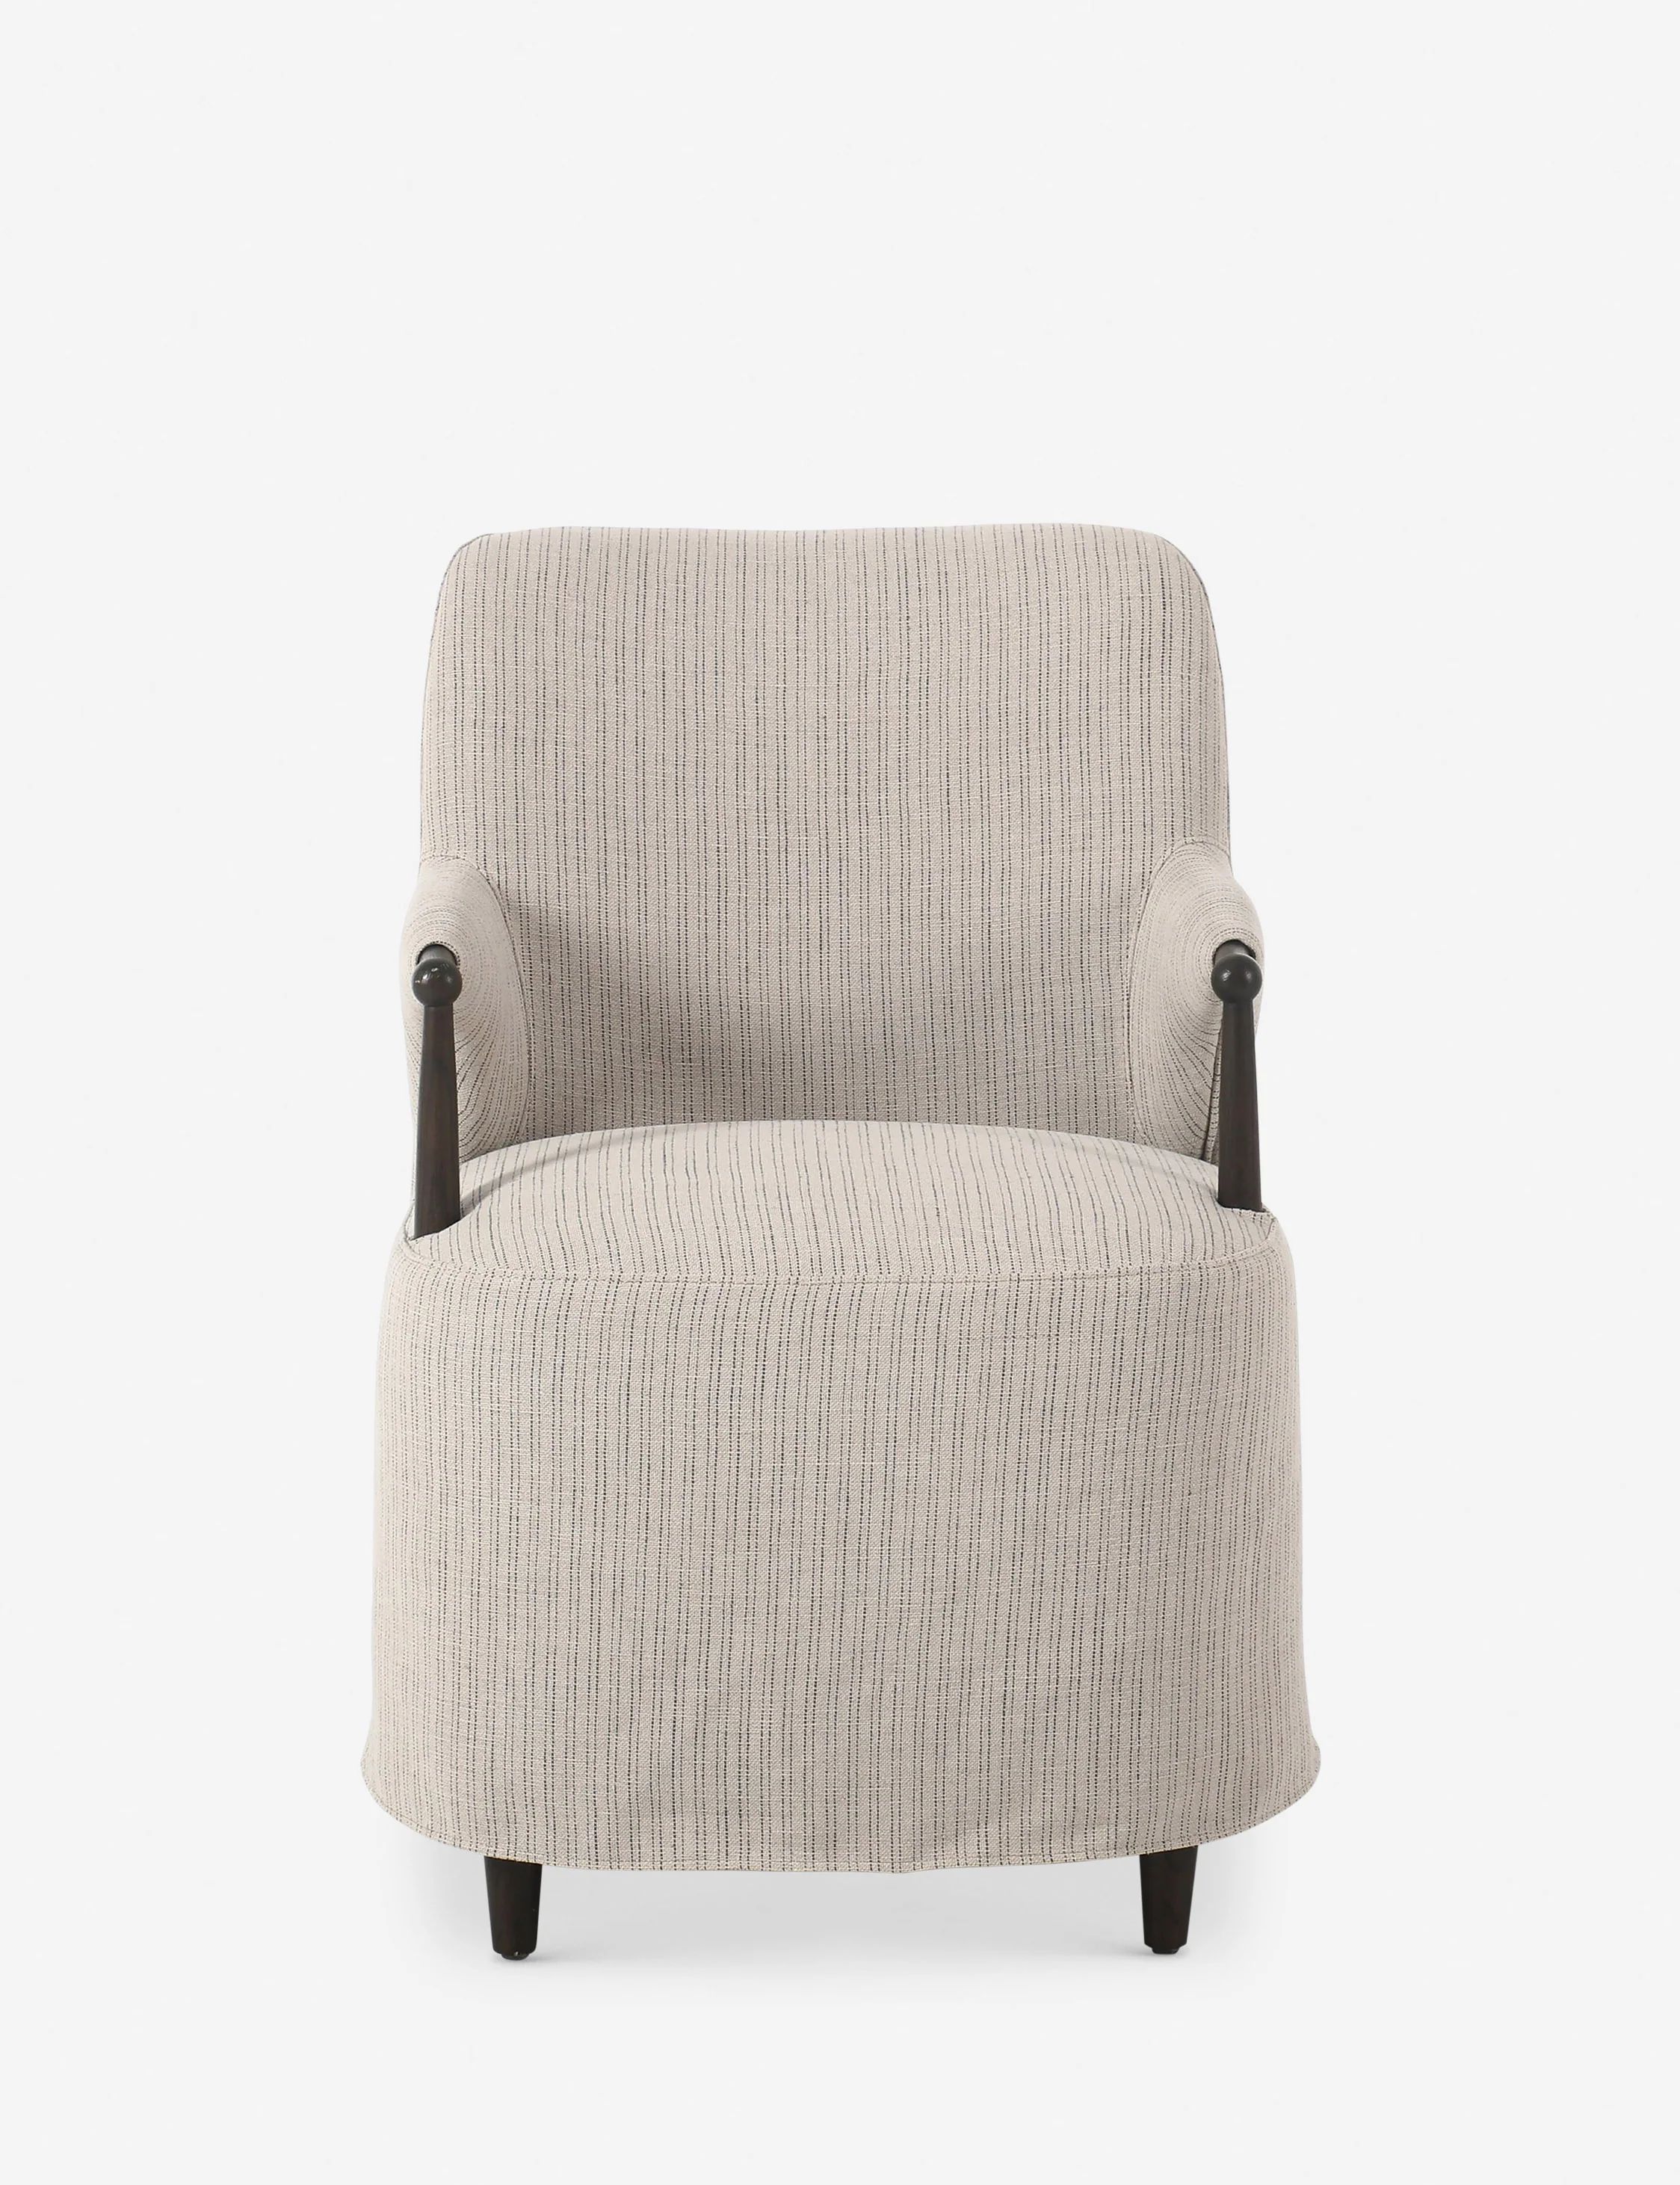 Brently Dining Chair by Amber Lewis x Four Hands | Lulu and Georgia 